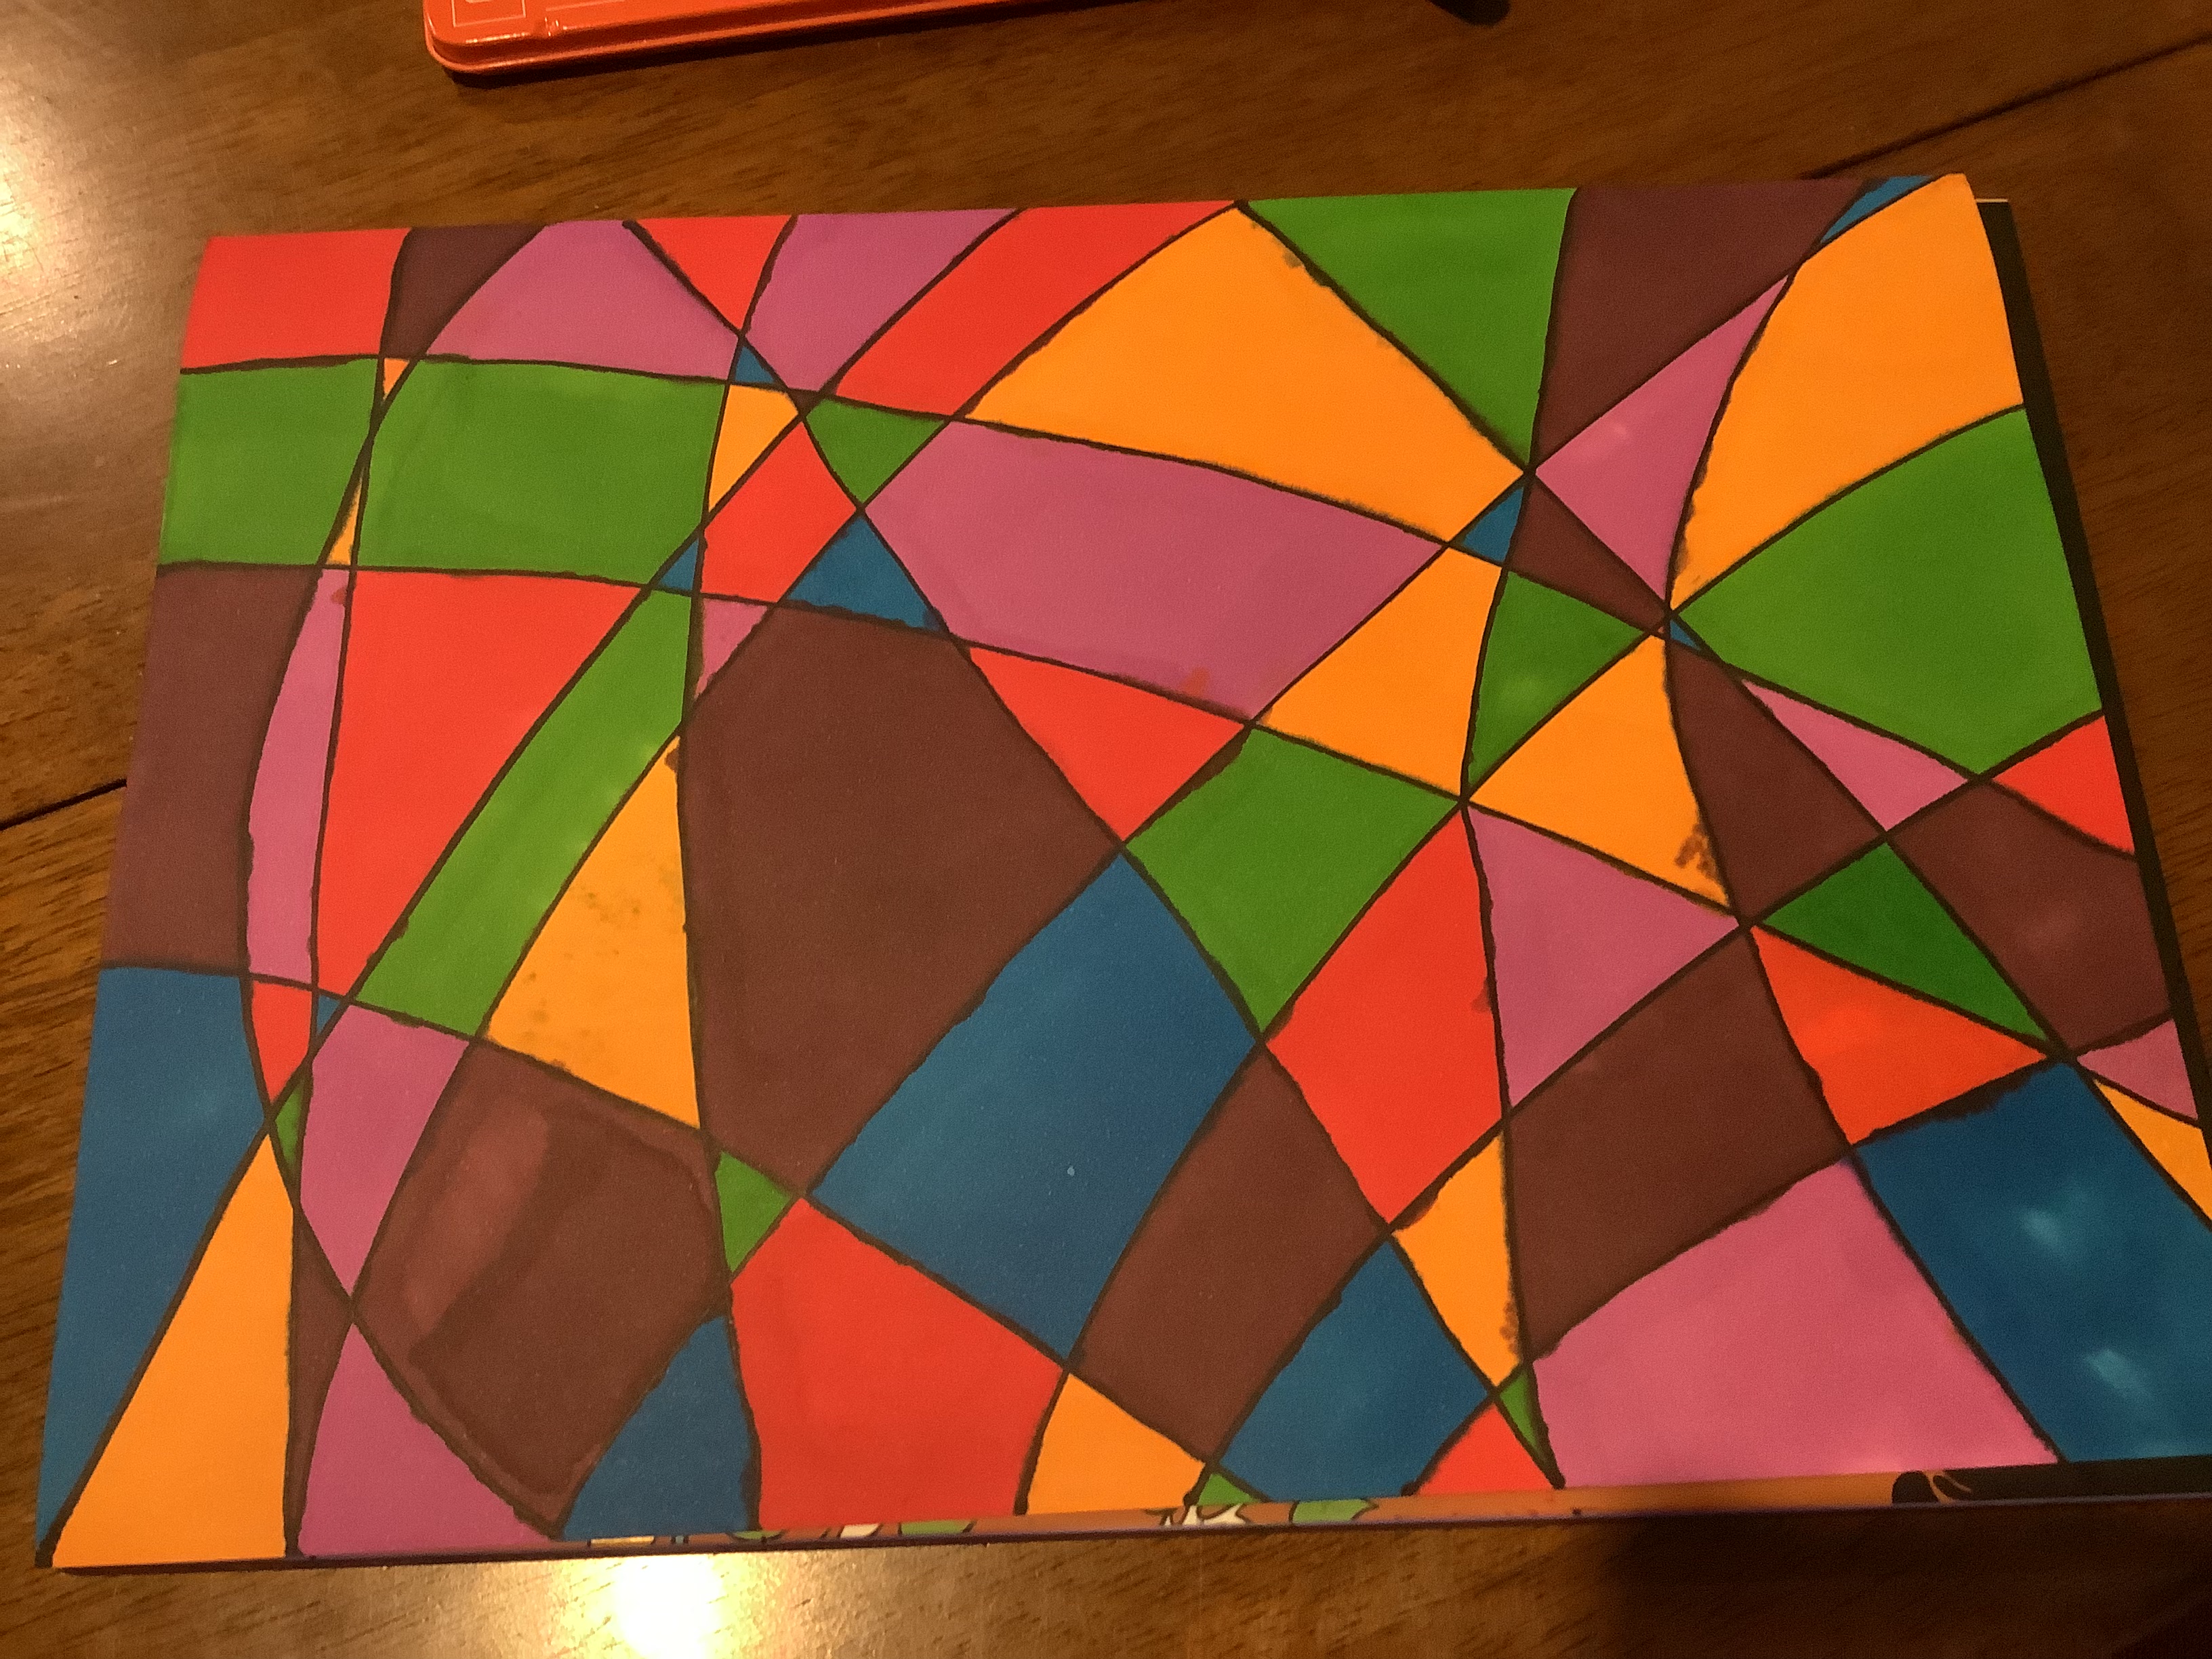 A multi-coloured, abstract art work done with alcohol markers.